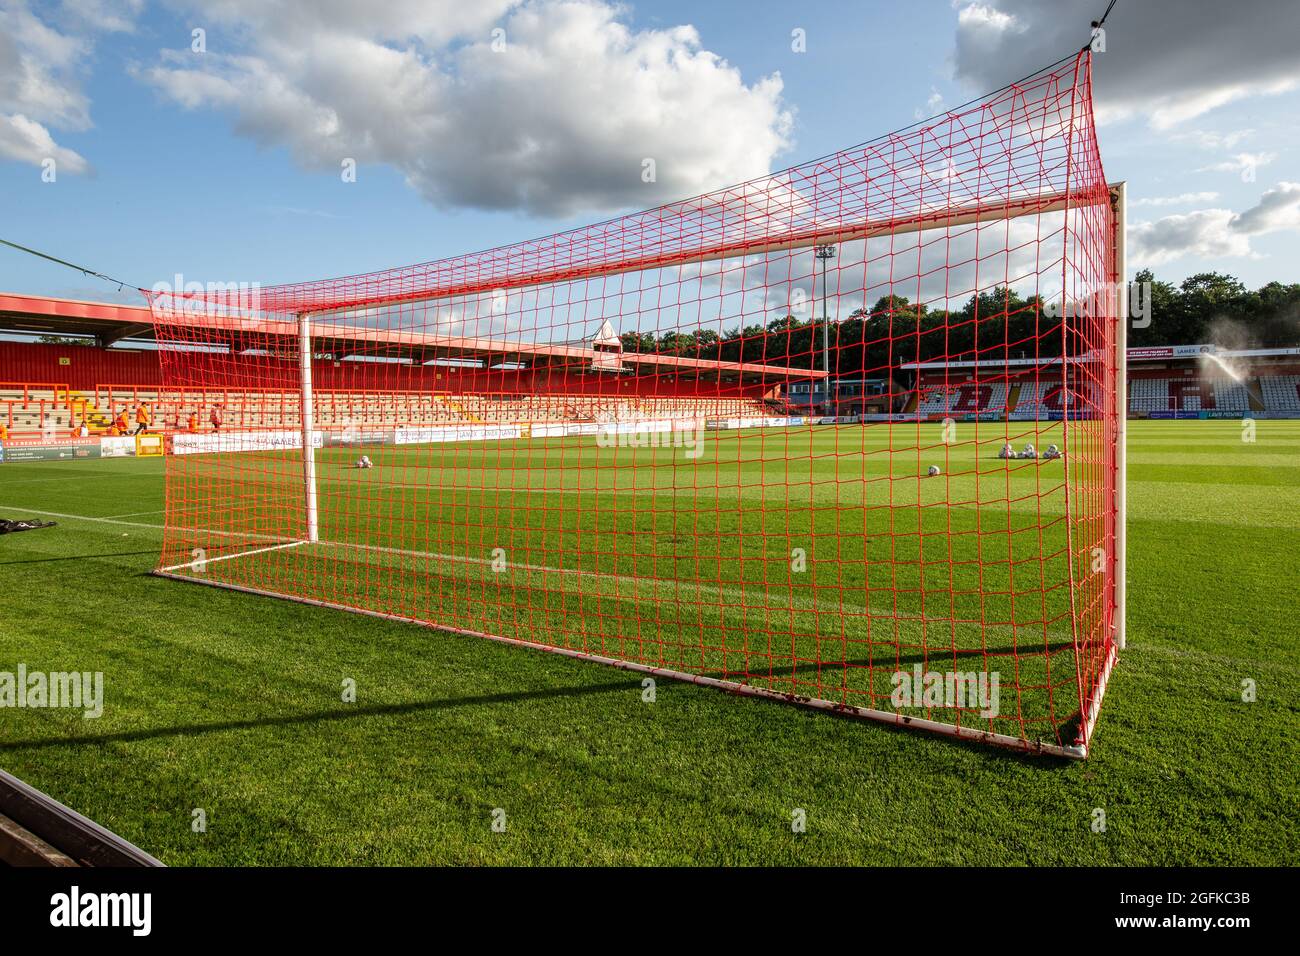 General view of modern lower league football / soccer ground. Lamex Stadium, Broadhall Way, Home of Stevenage Football Club Stock Photo